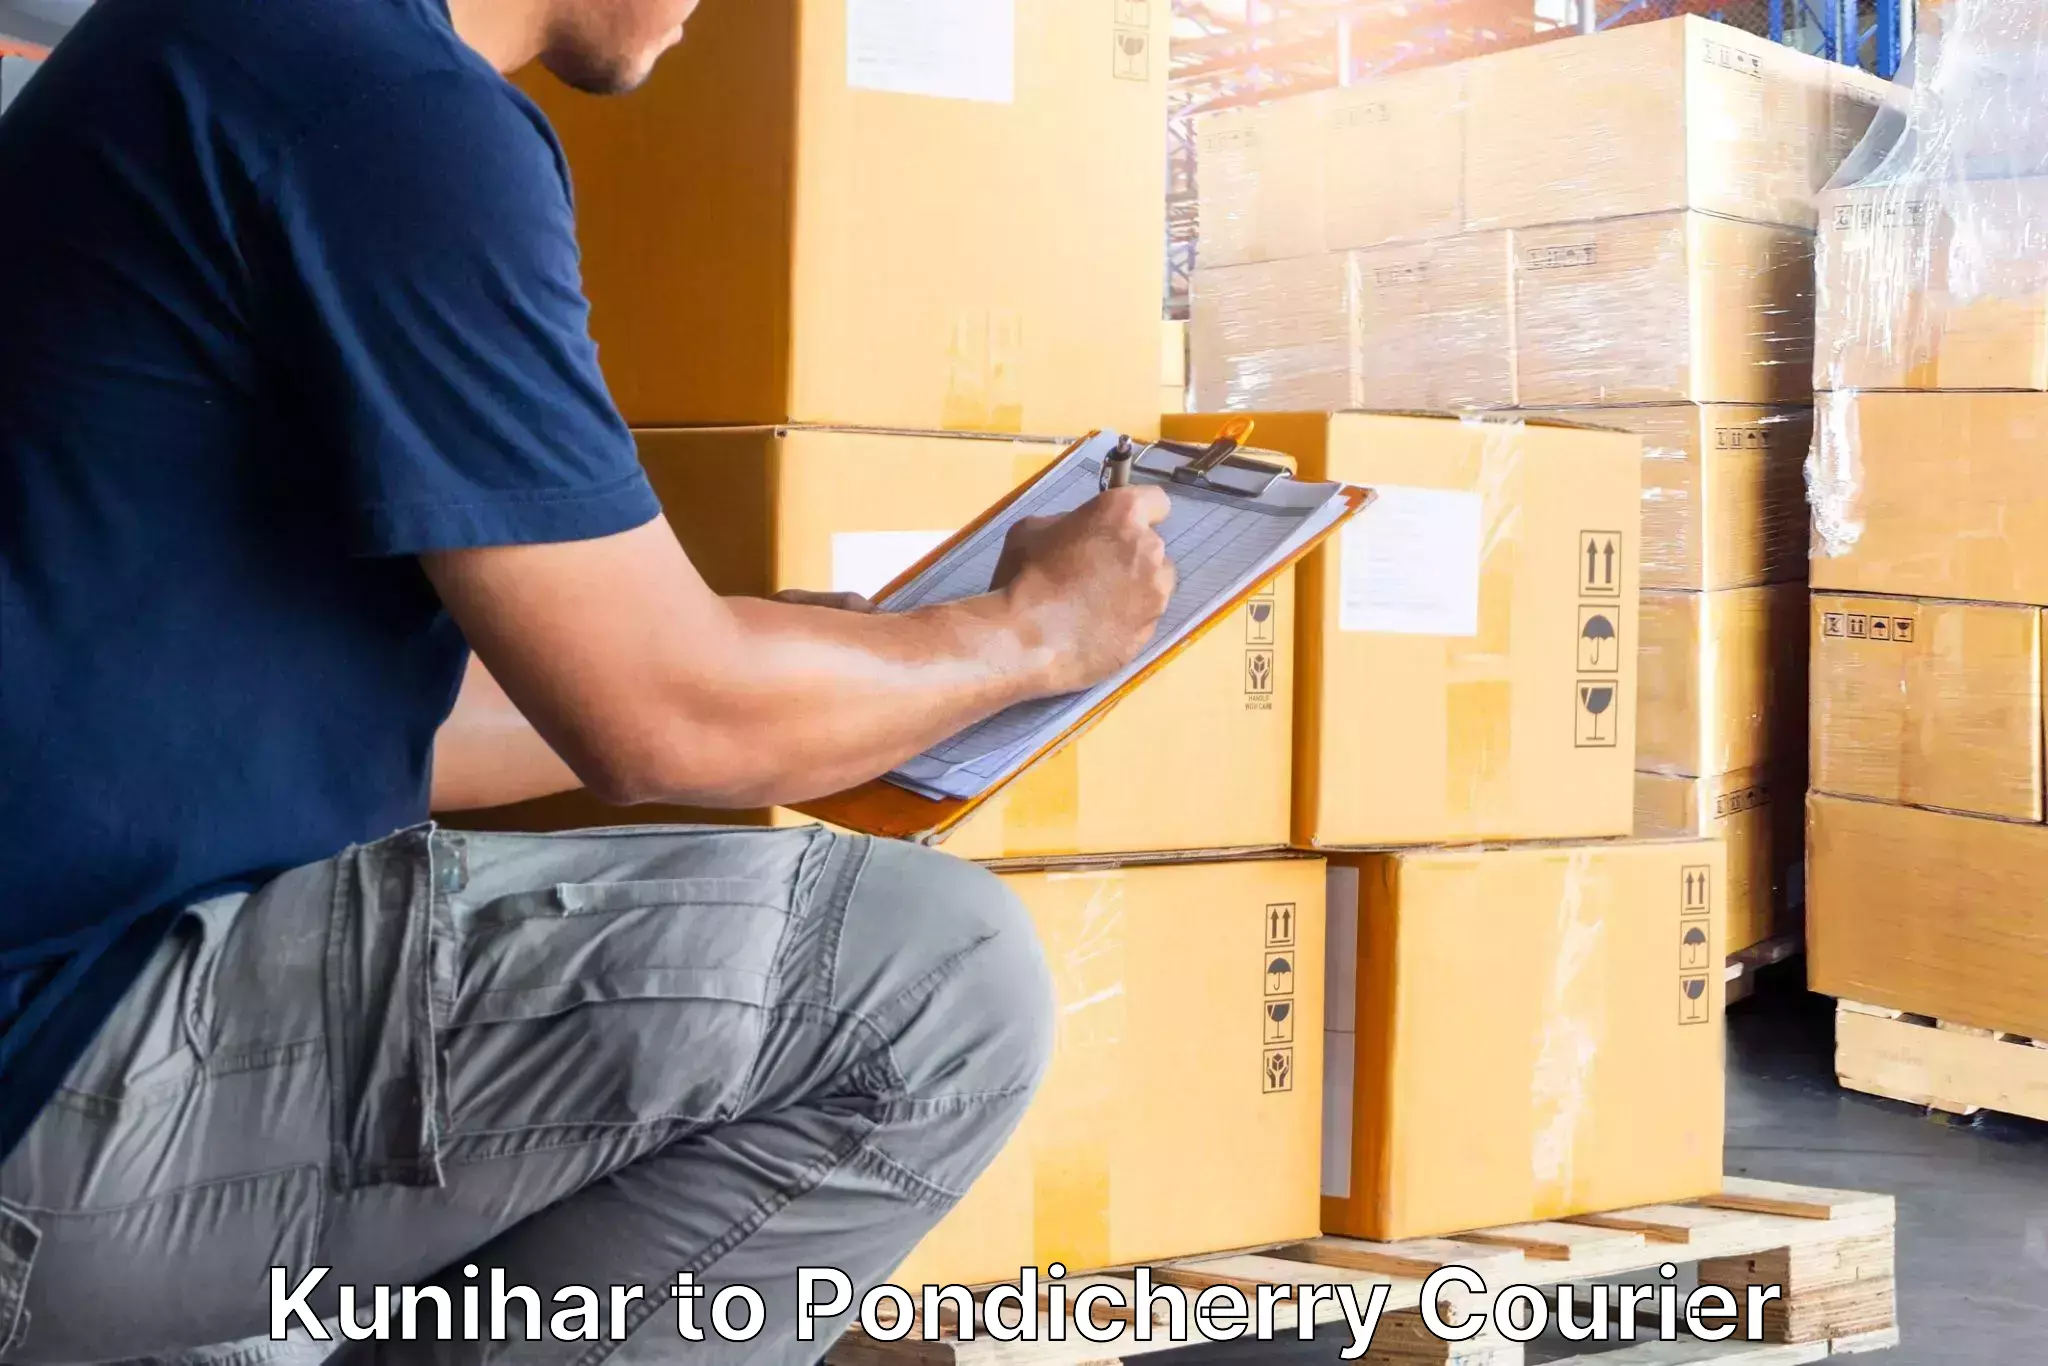 Moving and storage services Kunihar to Pondicherry